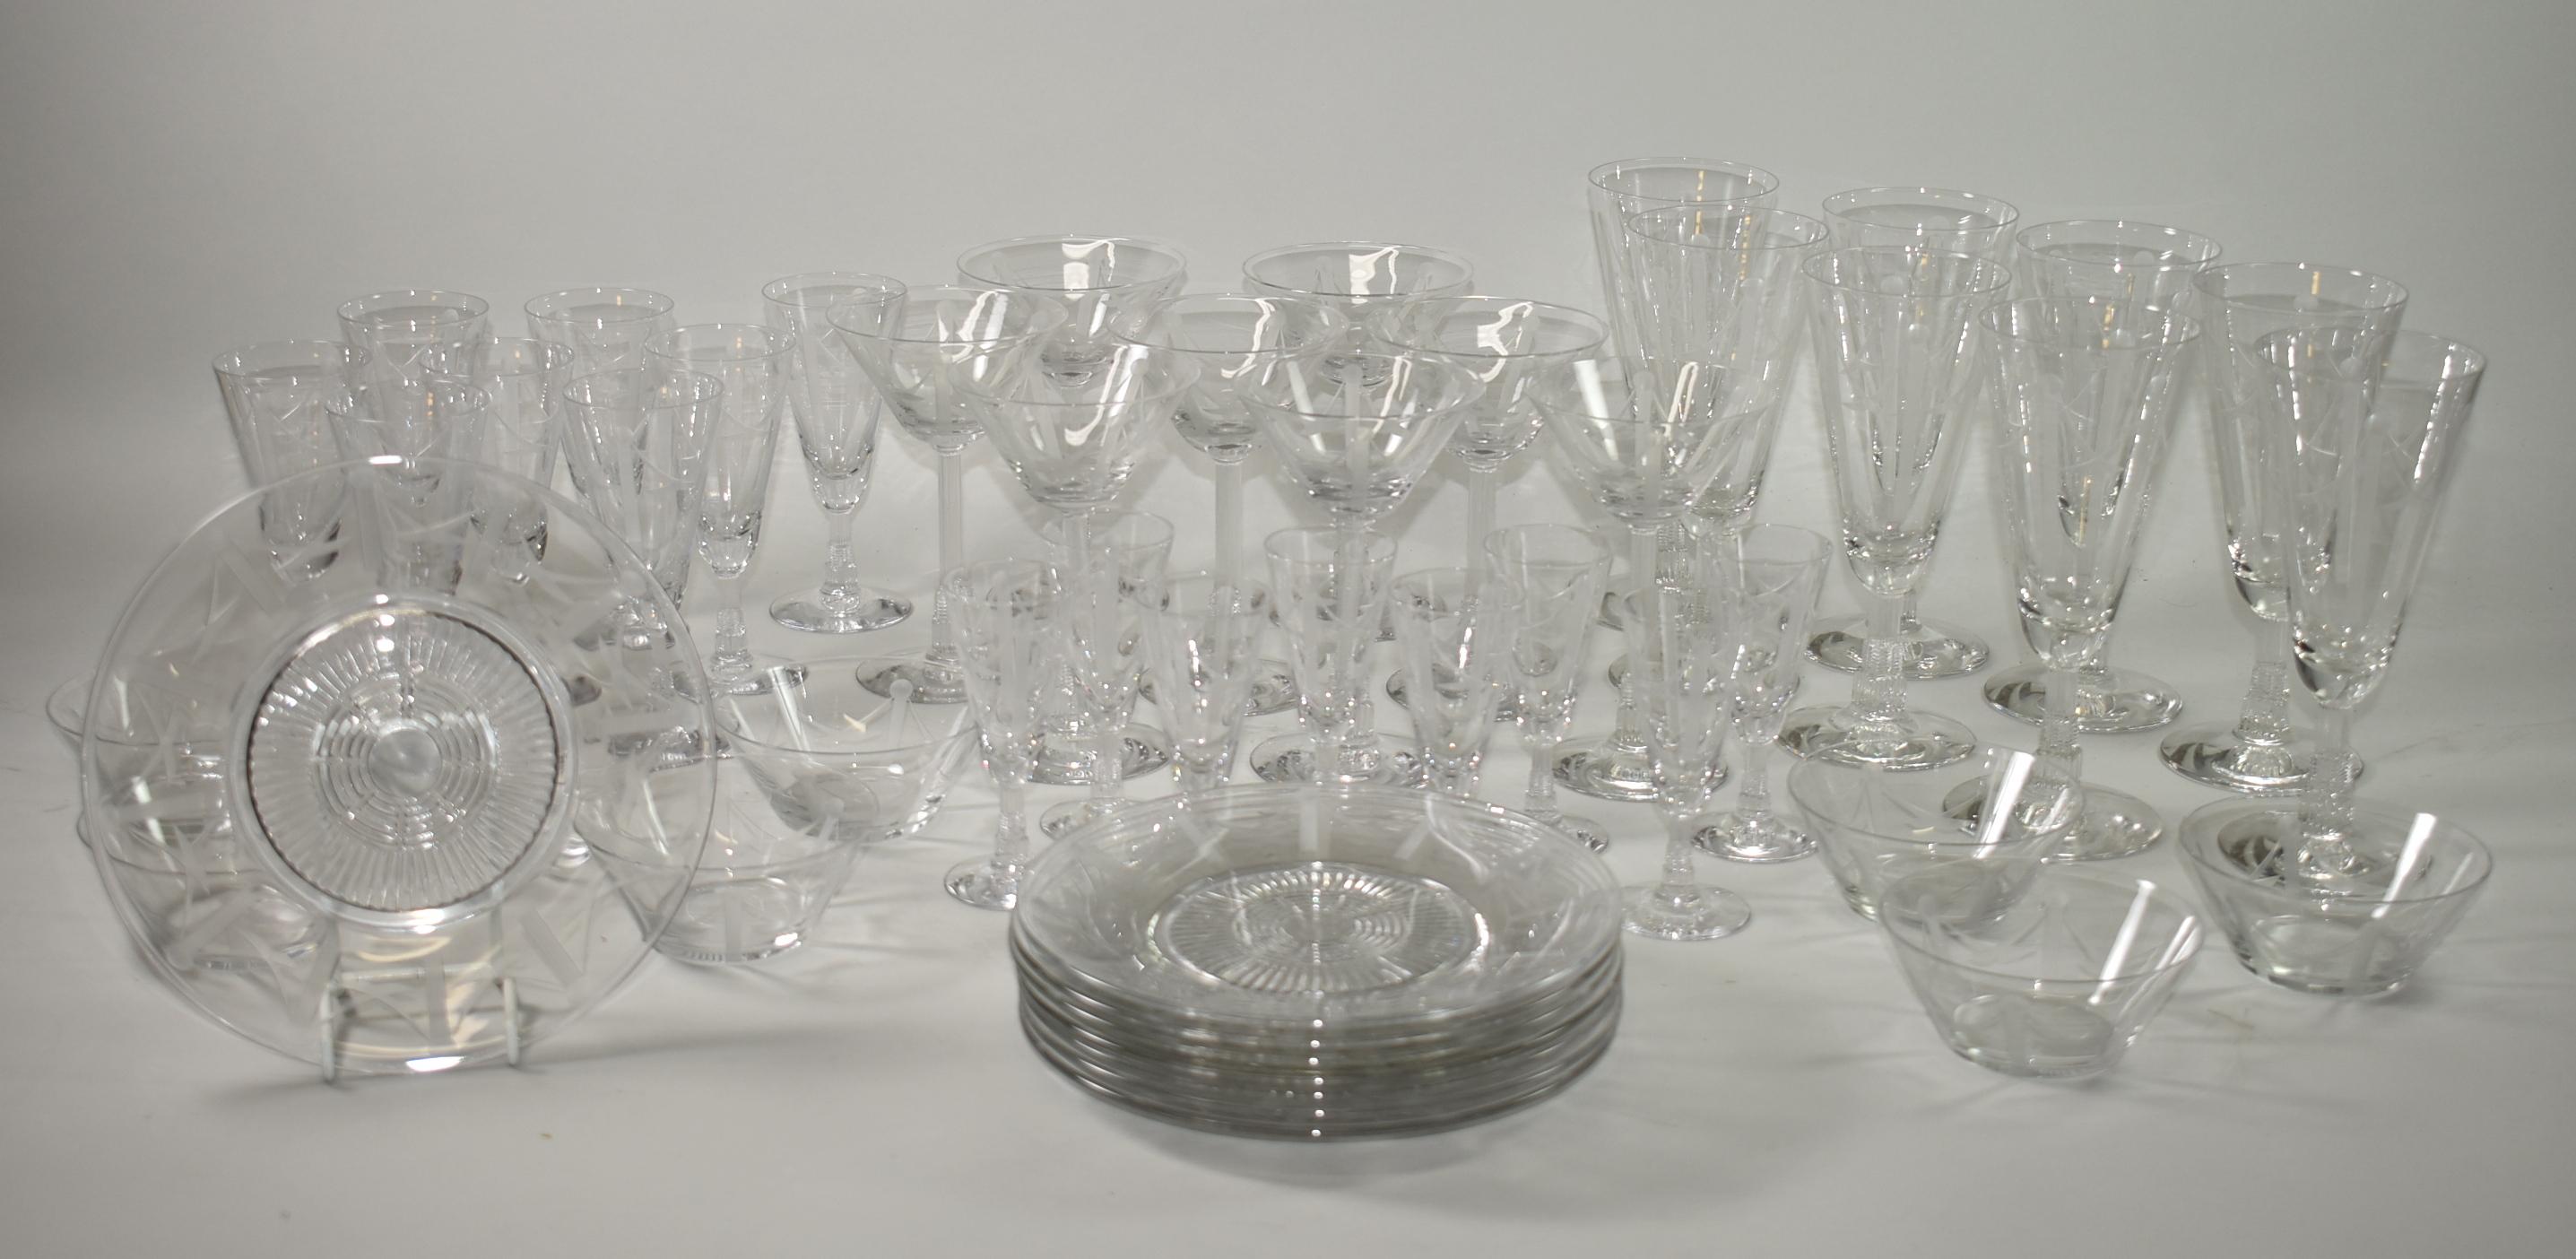 Set of 48 pieces of elegant Libbey stemware manufactured by the Libbey Glass Company, circa 1930's in the Malmaison Pattern. 8 pieces each of glasses: water (7 1/4